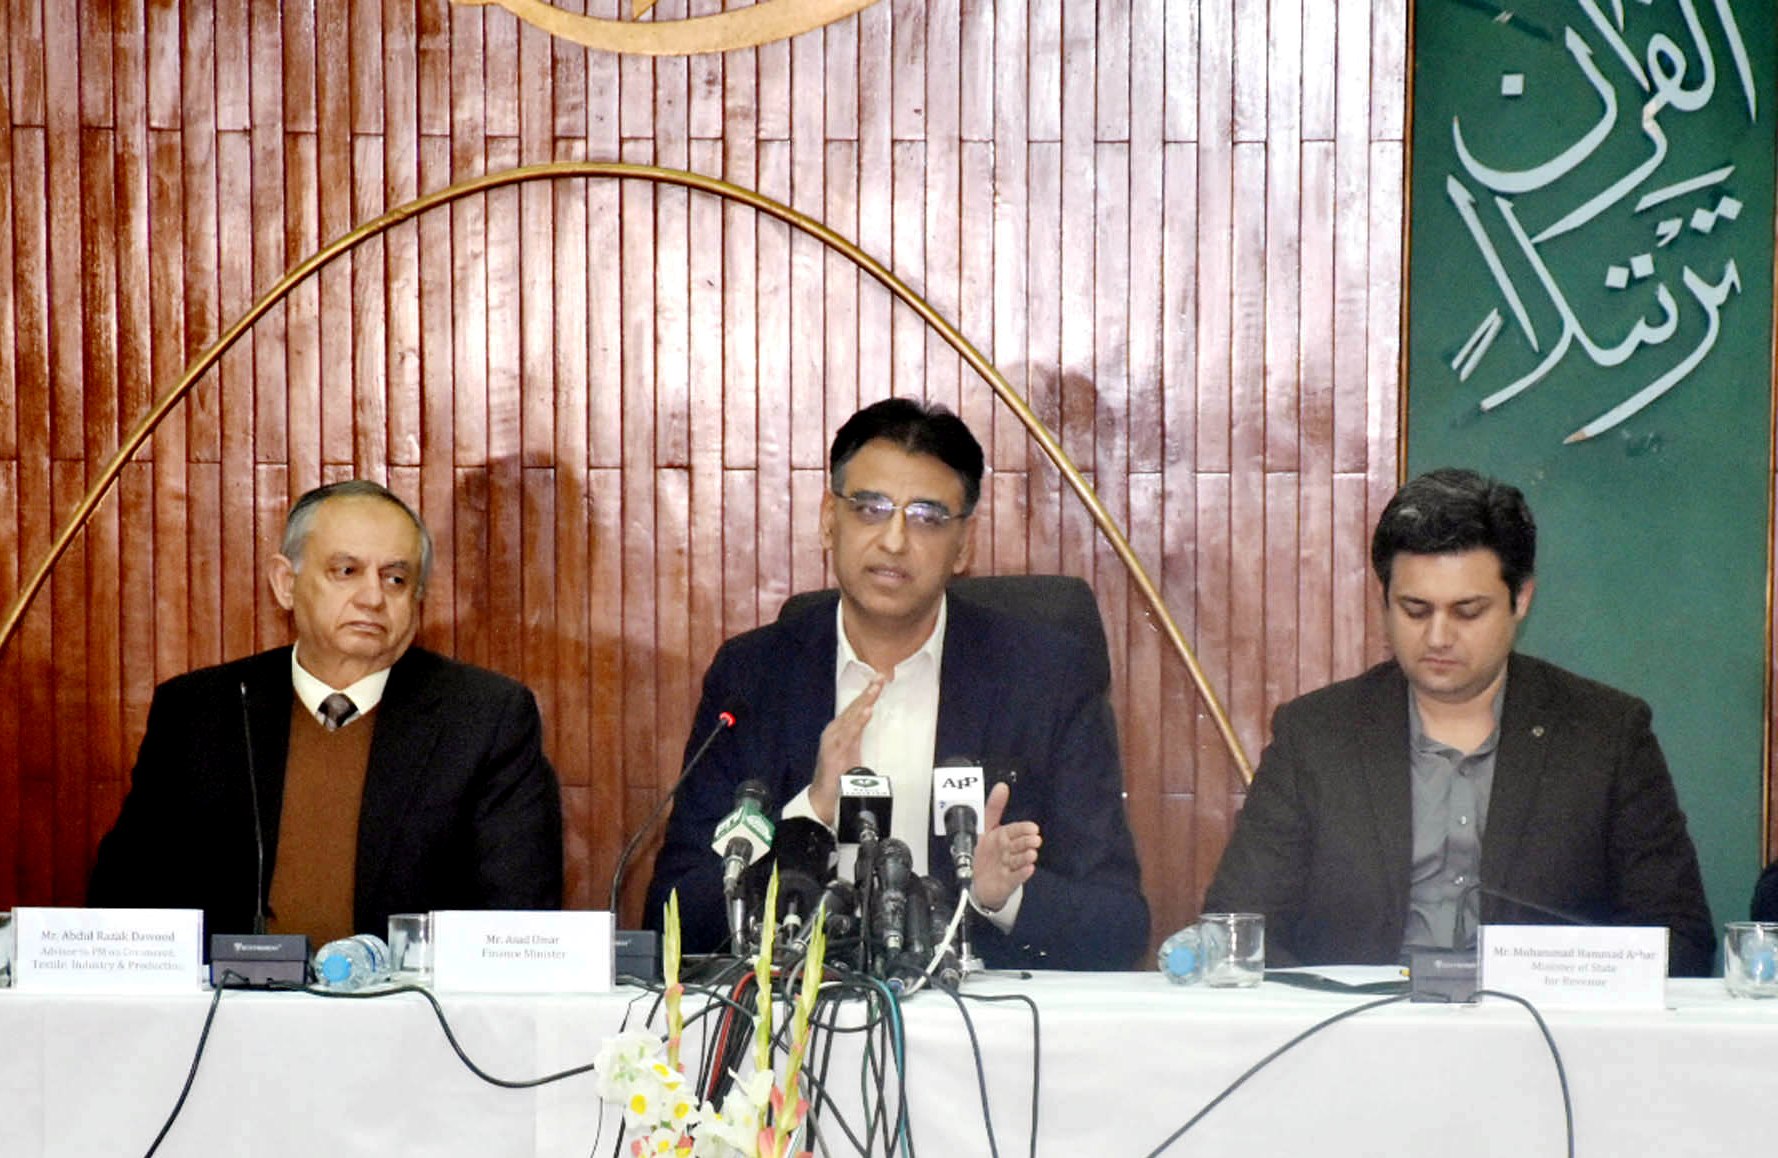 Finance Minister, Asad Umar, Adviser to Prime Minister for Commerce and Industry Abdul Razzak Dawood and Minister of State for Revenue Muhammad Hammad Azhar addressing a press conference in Islamabad on Jnauary 24, 2019.